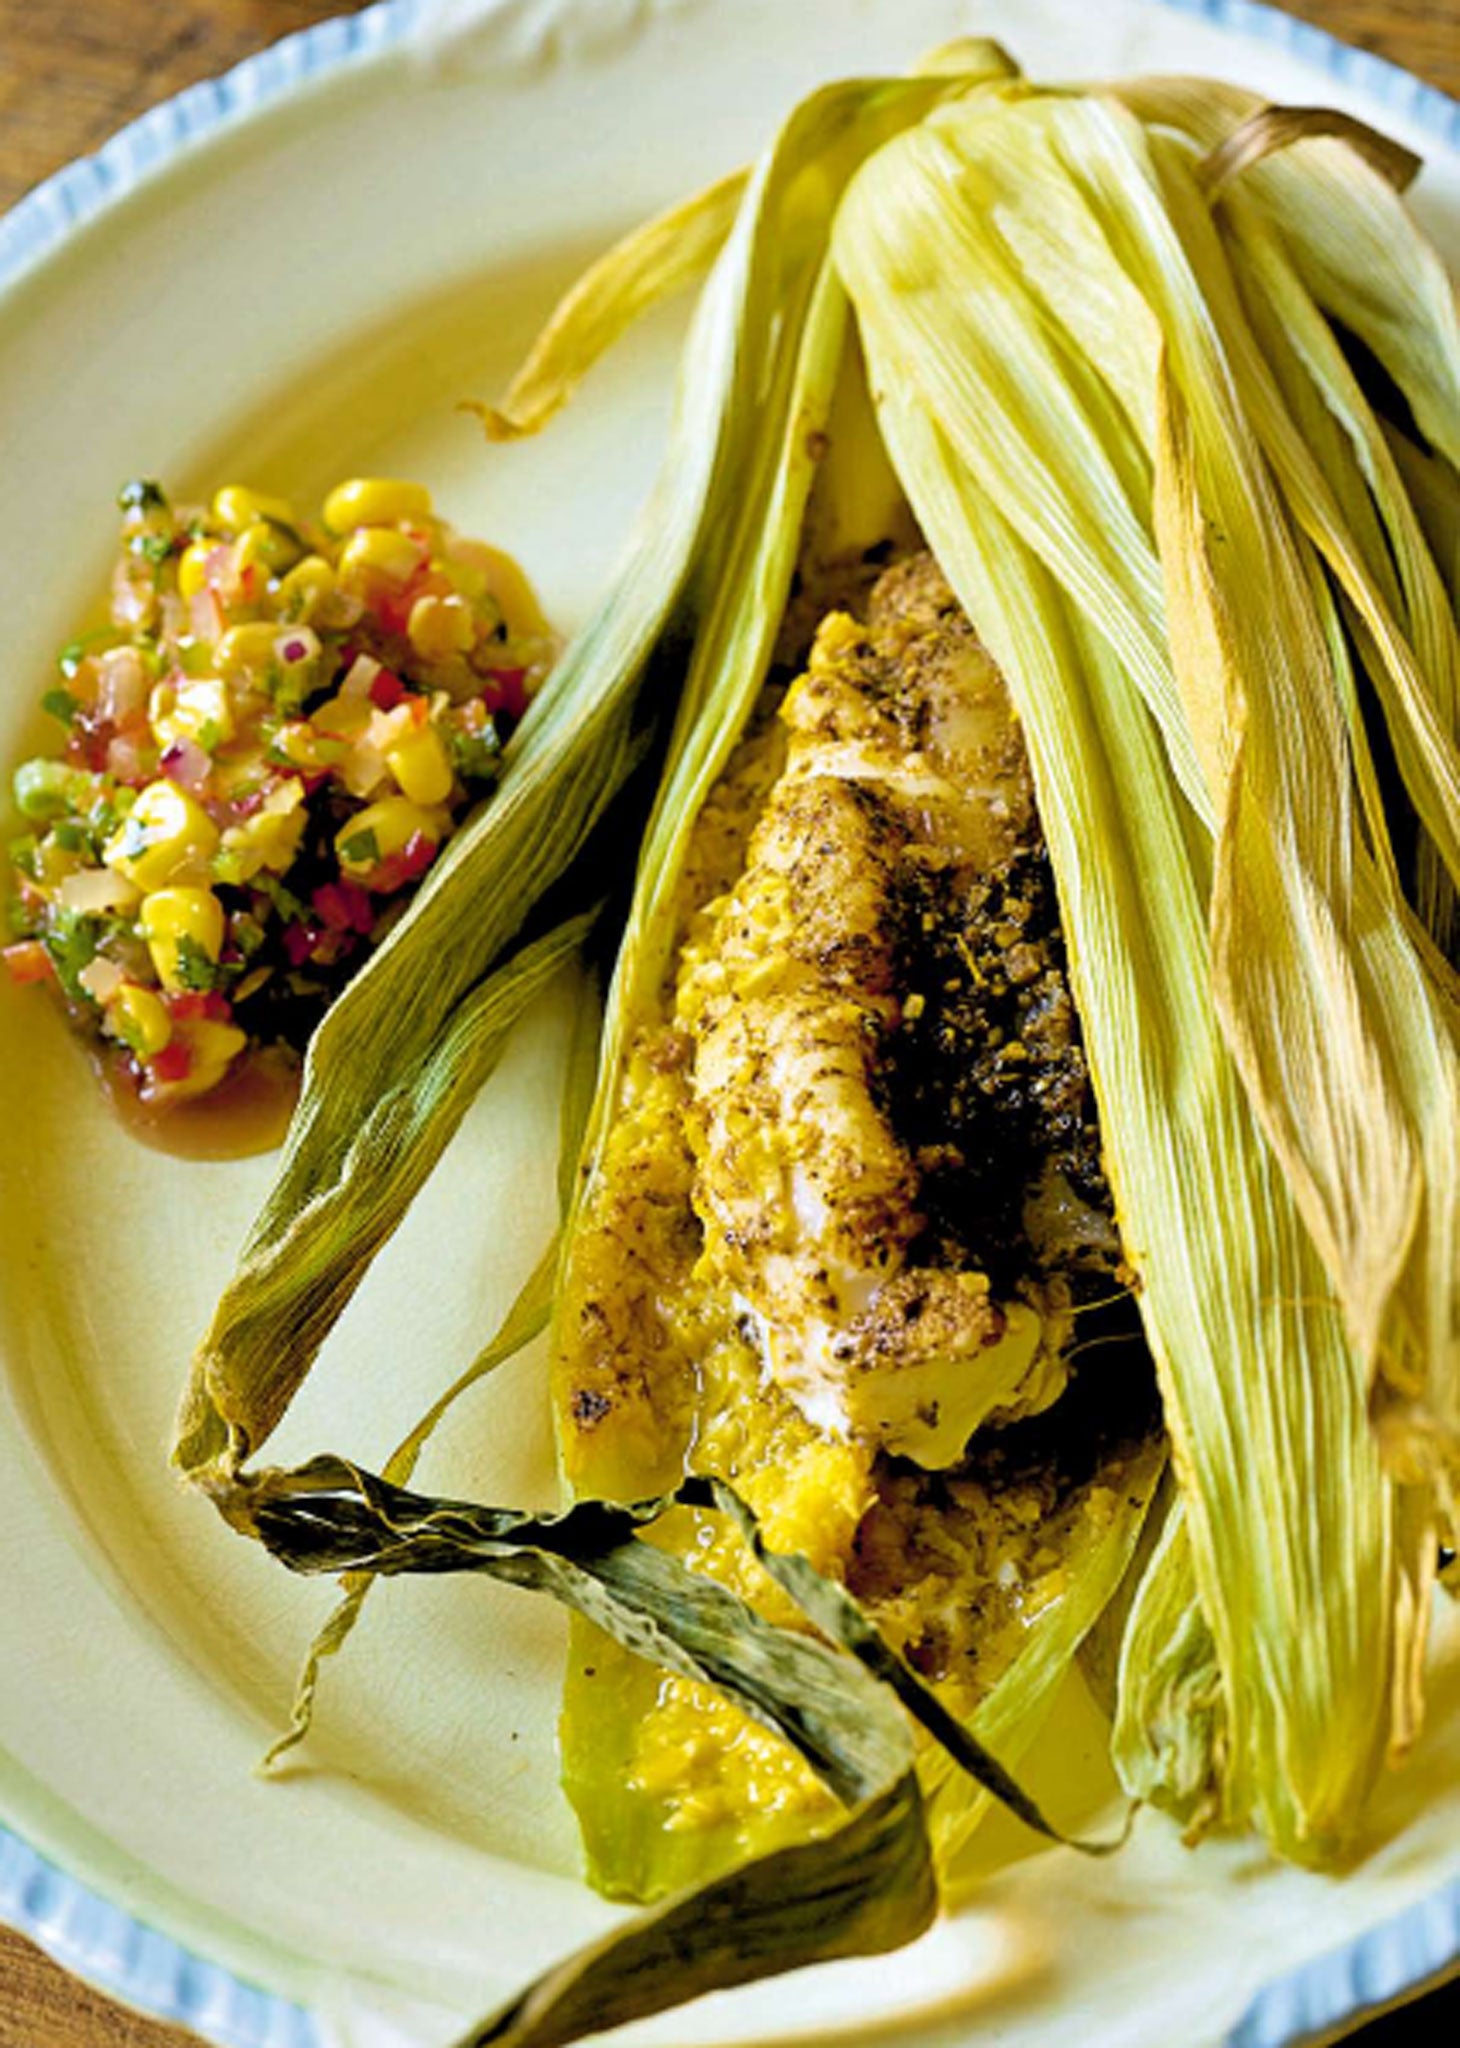 Grouse with polenta and corn can be a starter with a soup, or you can double it up as a main (Jason Lowe)